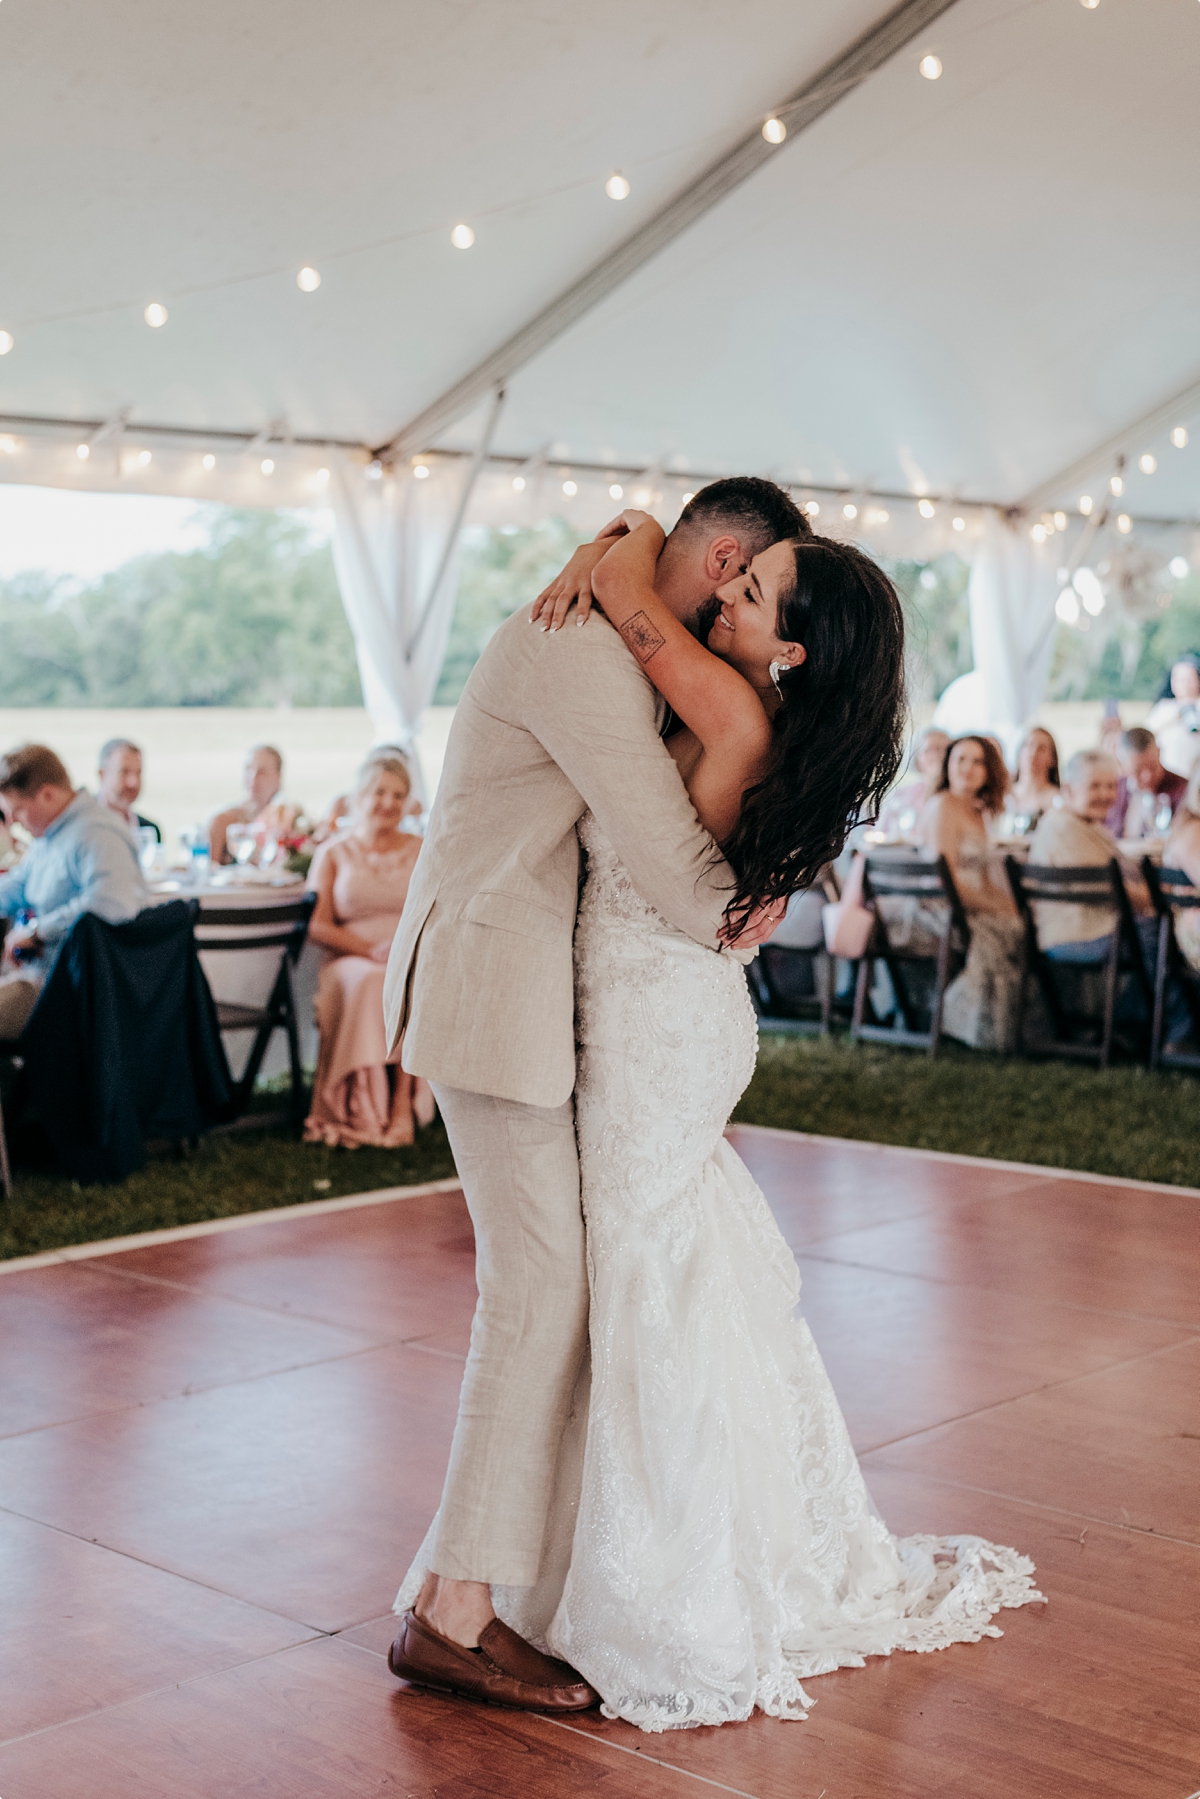 Bride and groom first dance at Agapae Oaks wedding reception